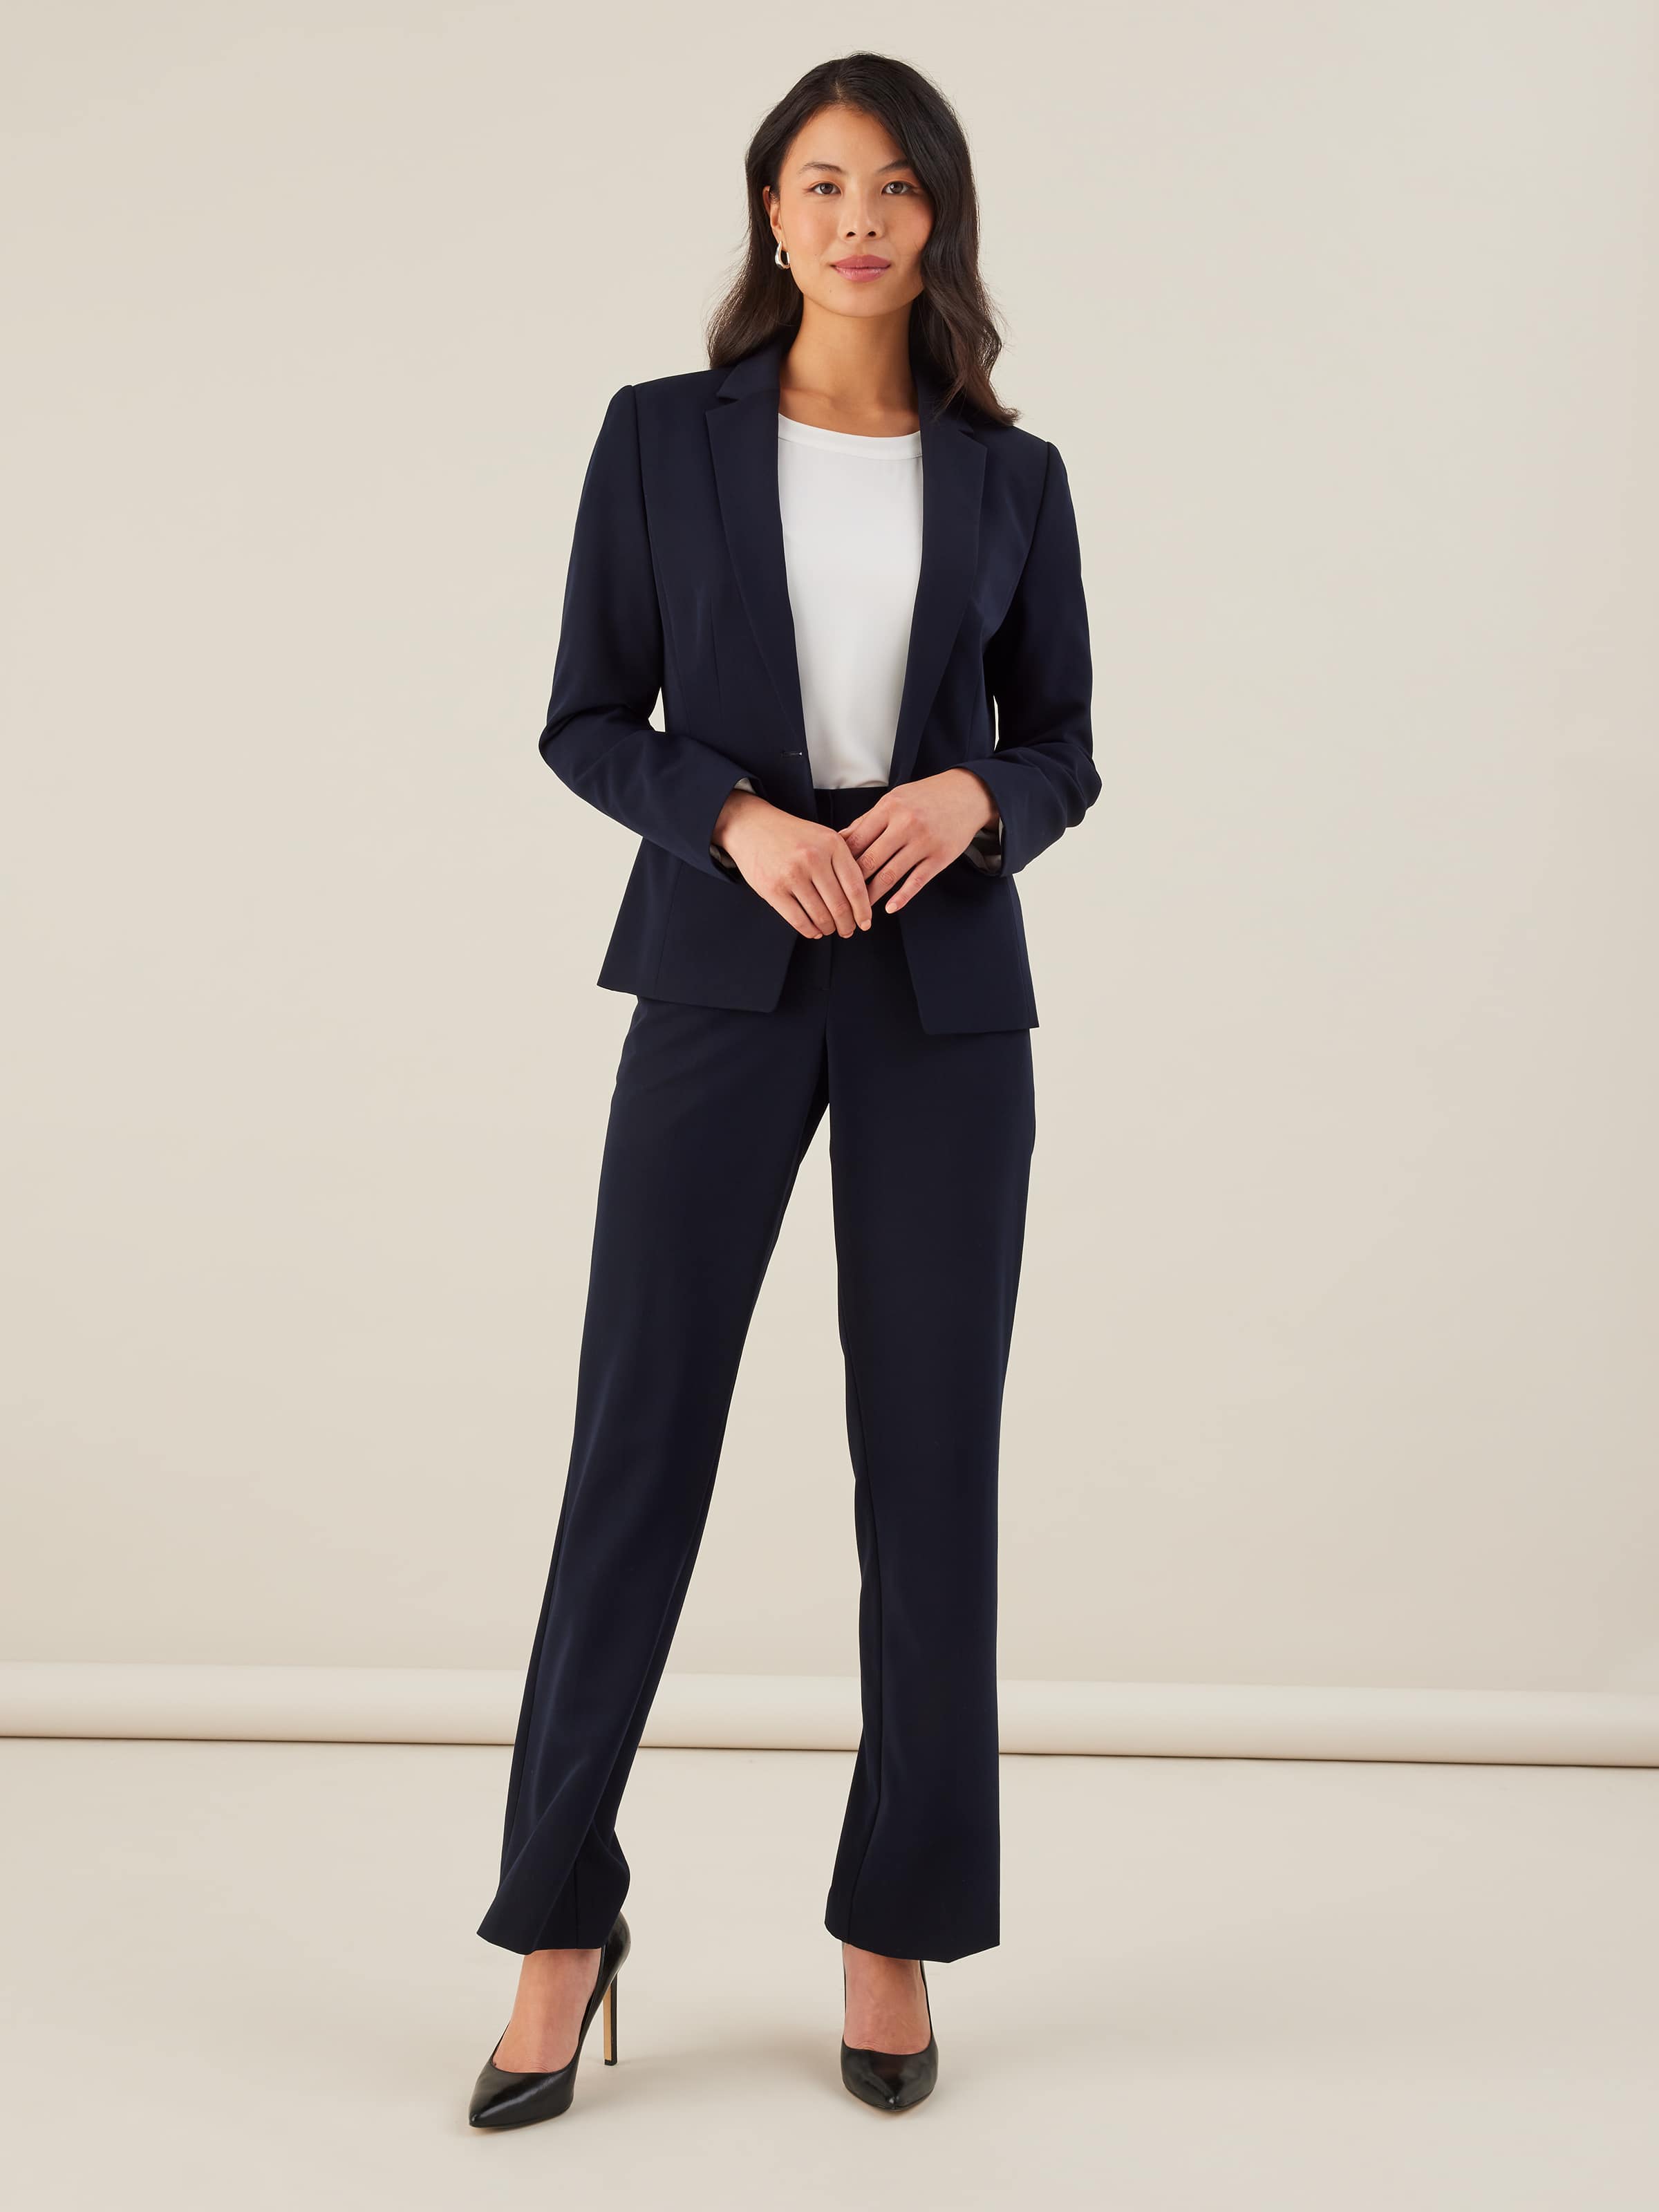 6 Best Suits For Women 2021  Best Womens Pant Suits  newscomau   Australias leading news site